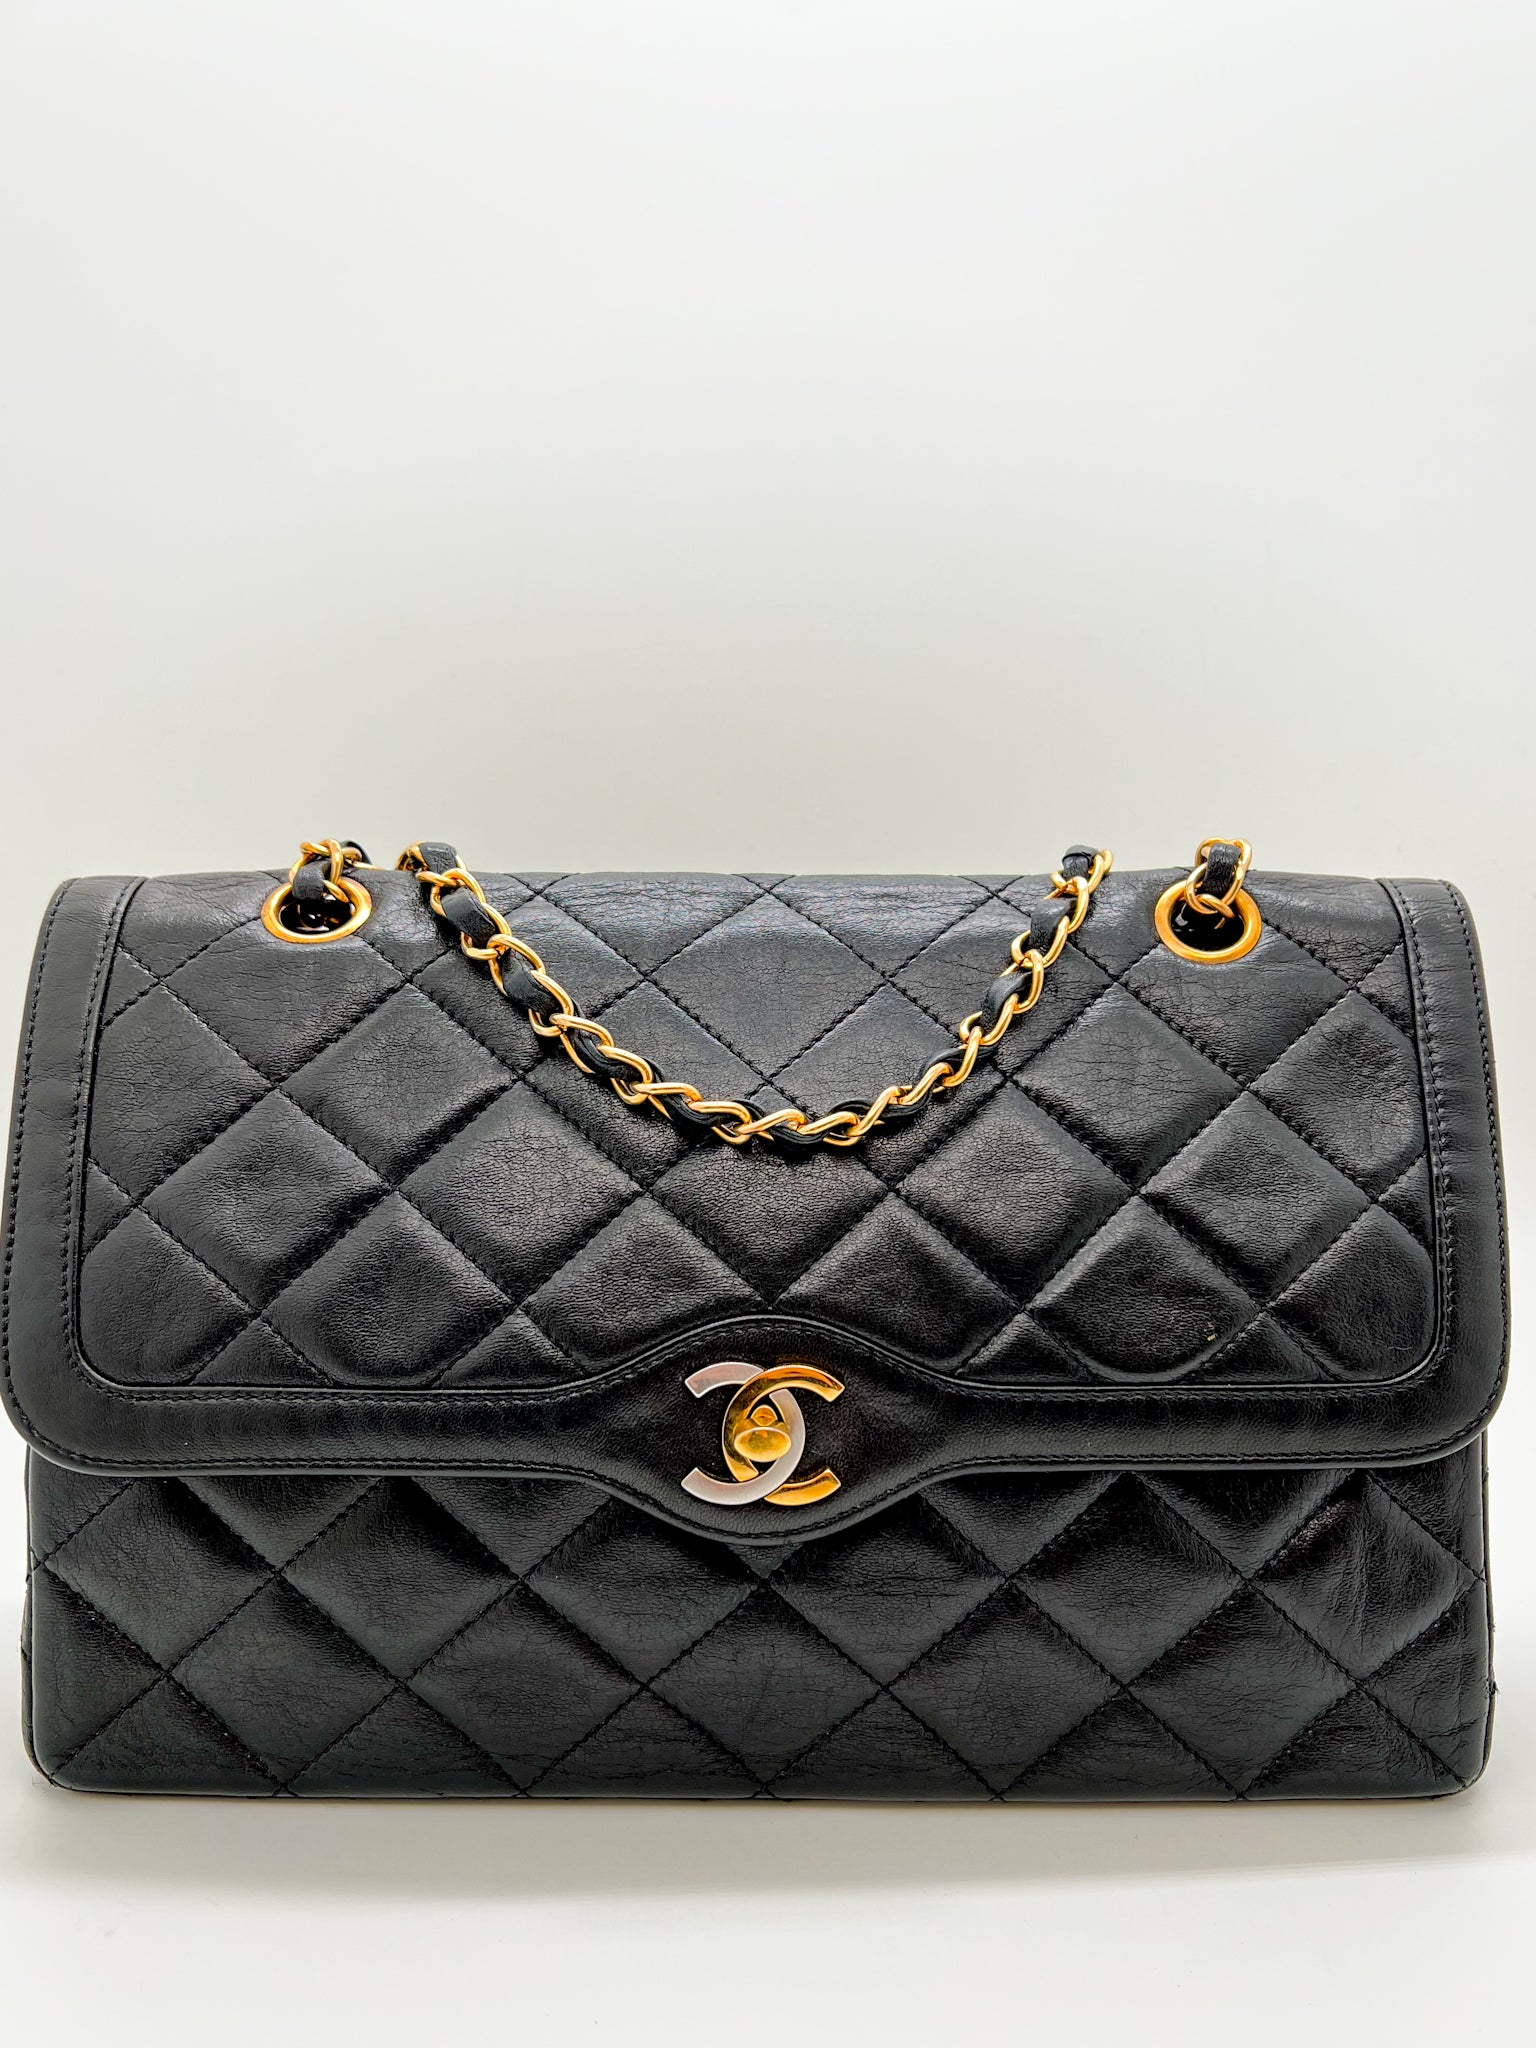 Chanel Bags  Etsy New Zealand